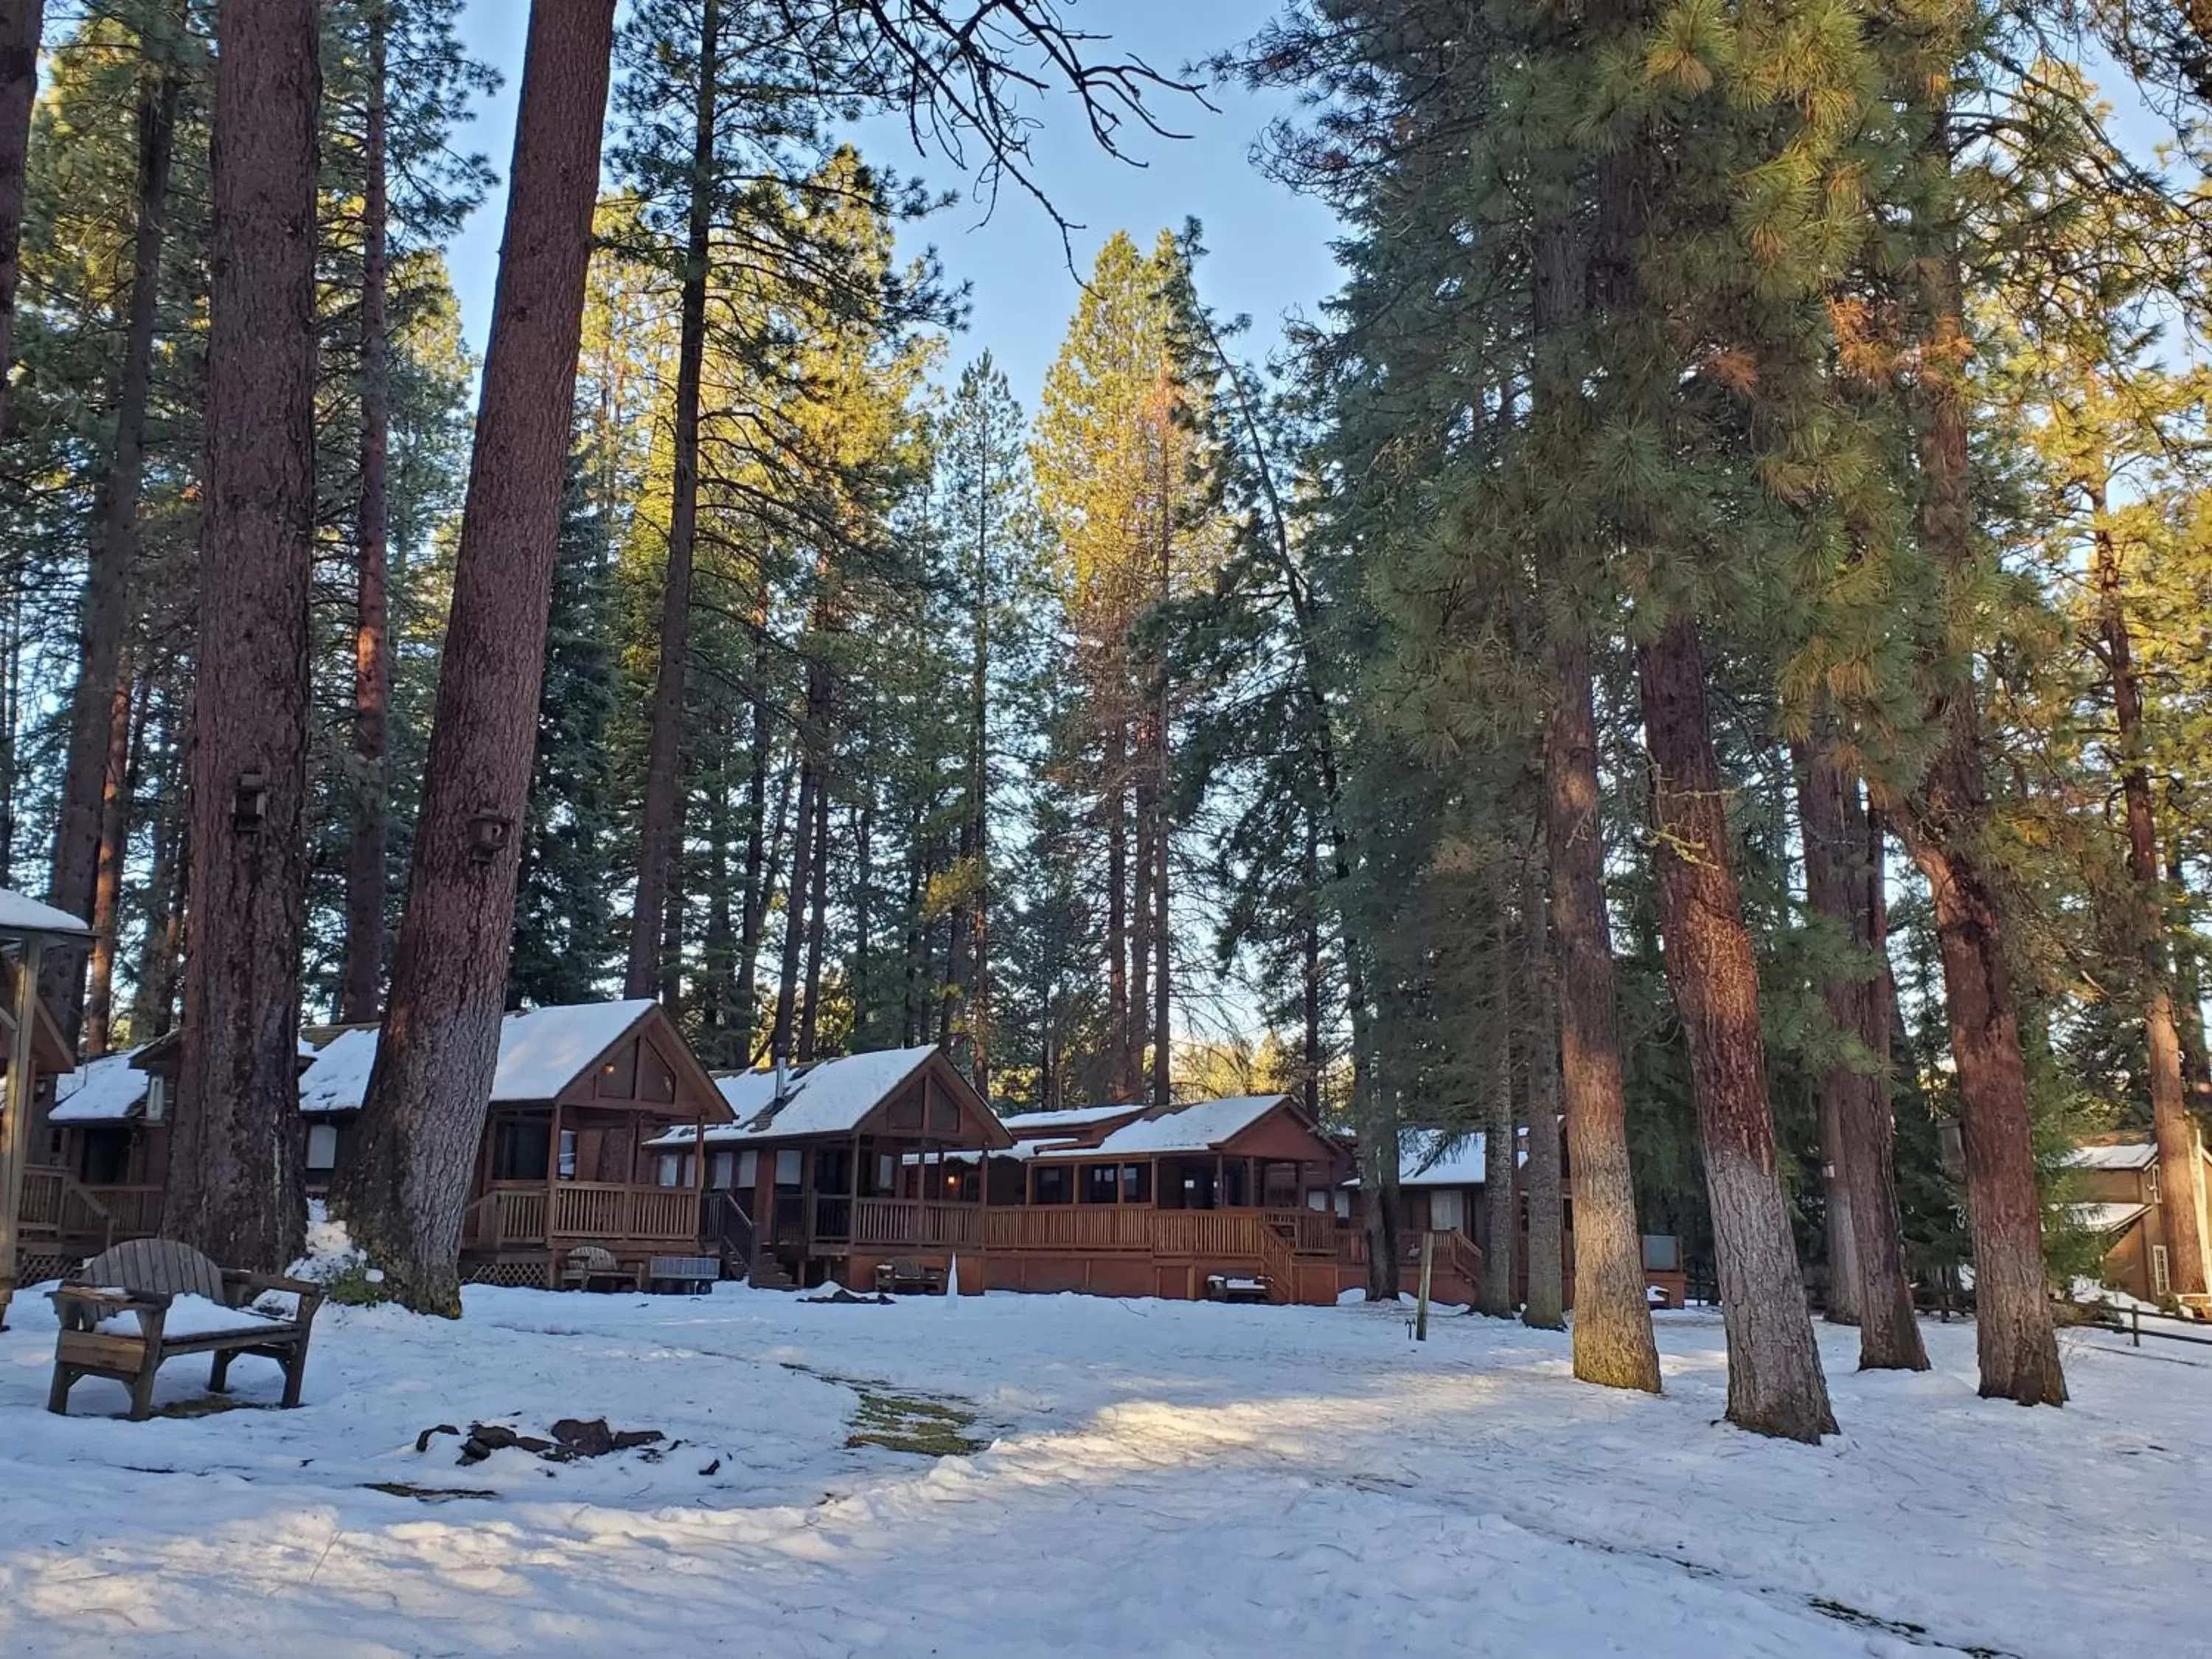 Property building, Winter in Cold Springs Resort